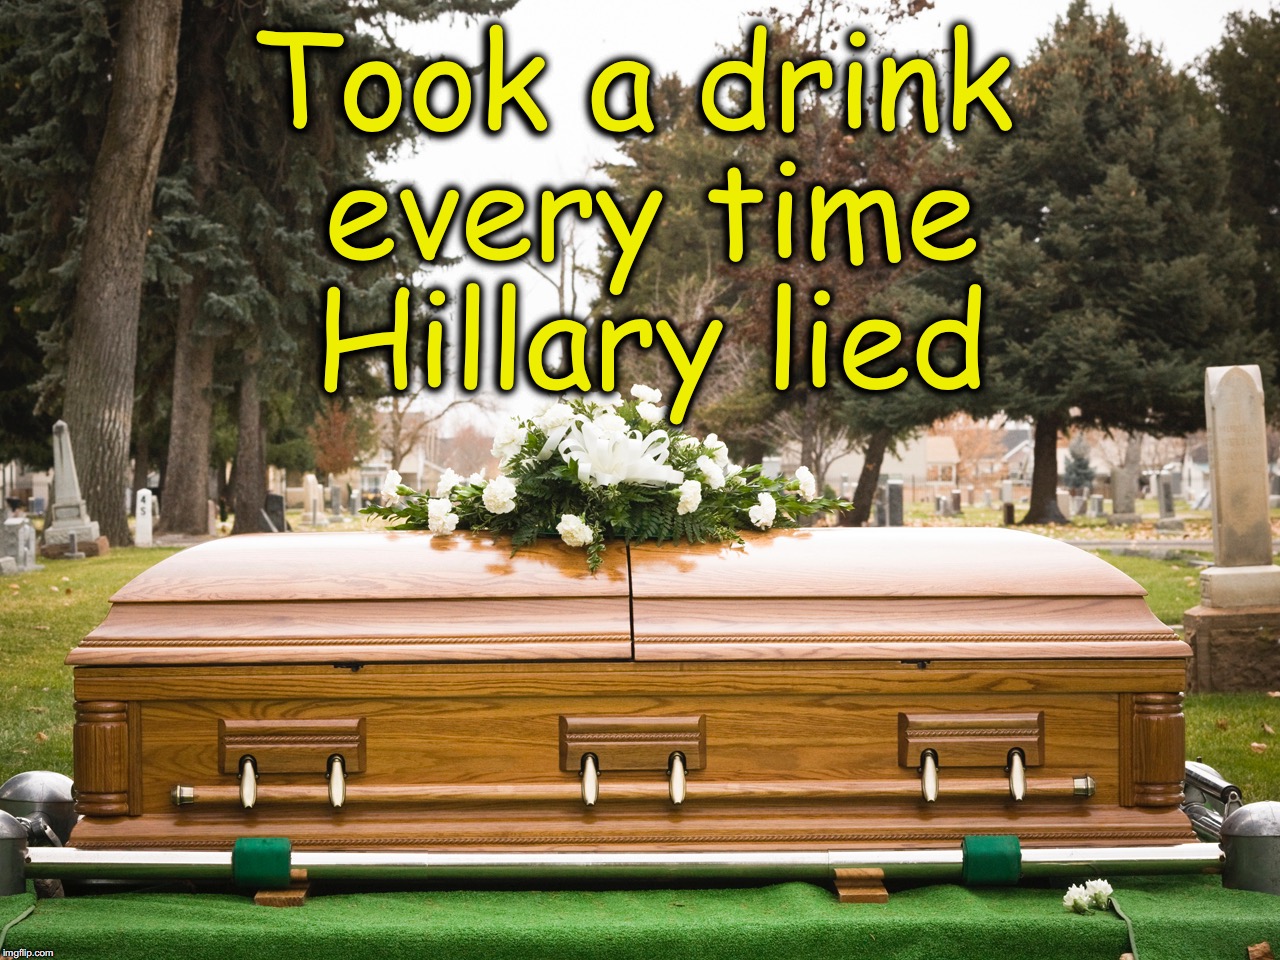 Took a drink every time Hillary lied | made w/ Imgflip meme maker